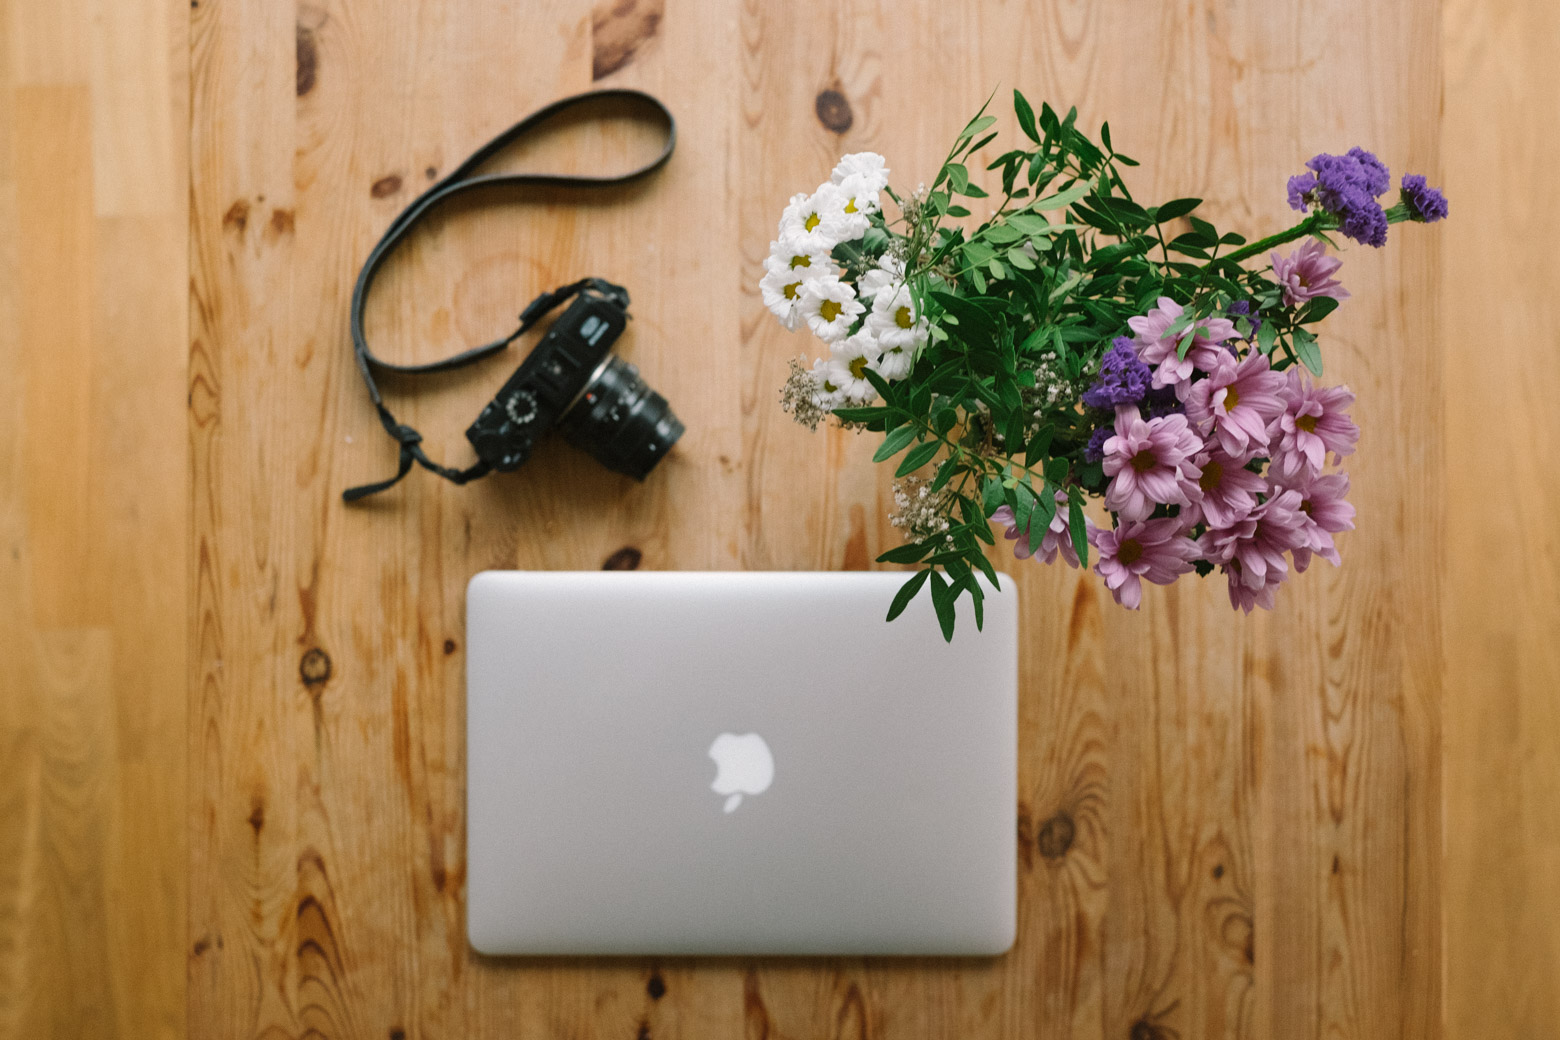 A computer next to flowers and coffee